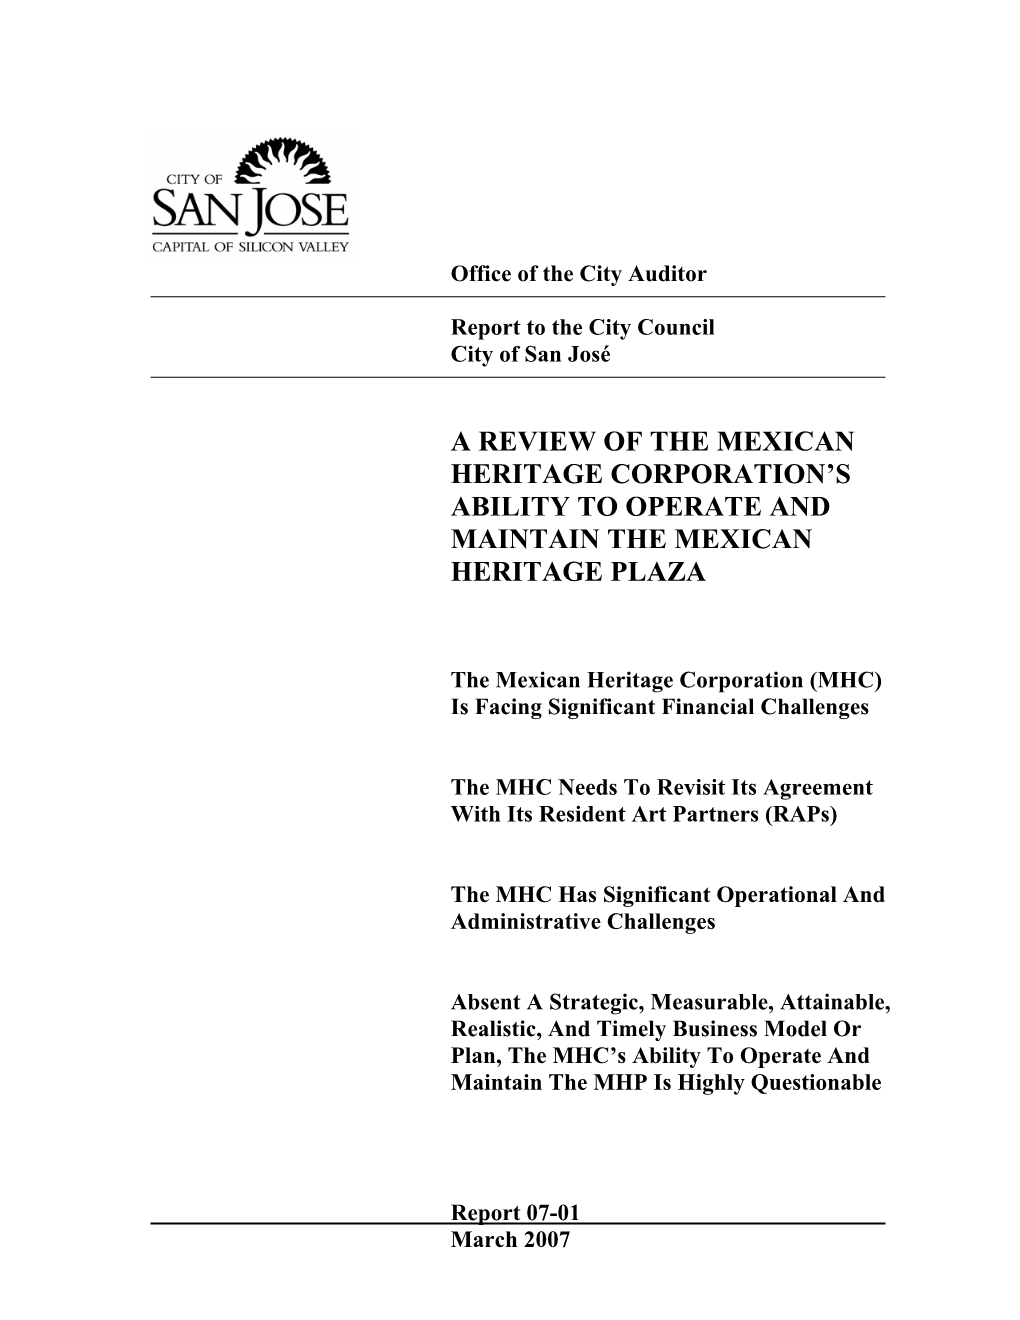 A Review of the Mexican Heritage Corporation's Ability to Operate And